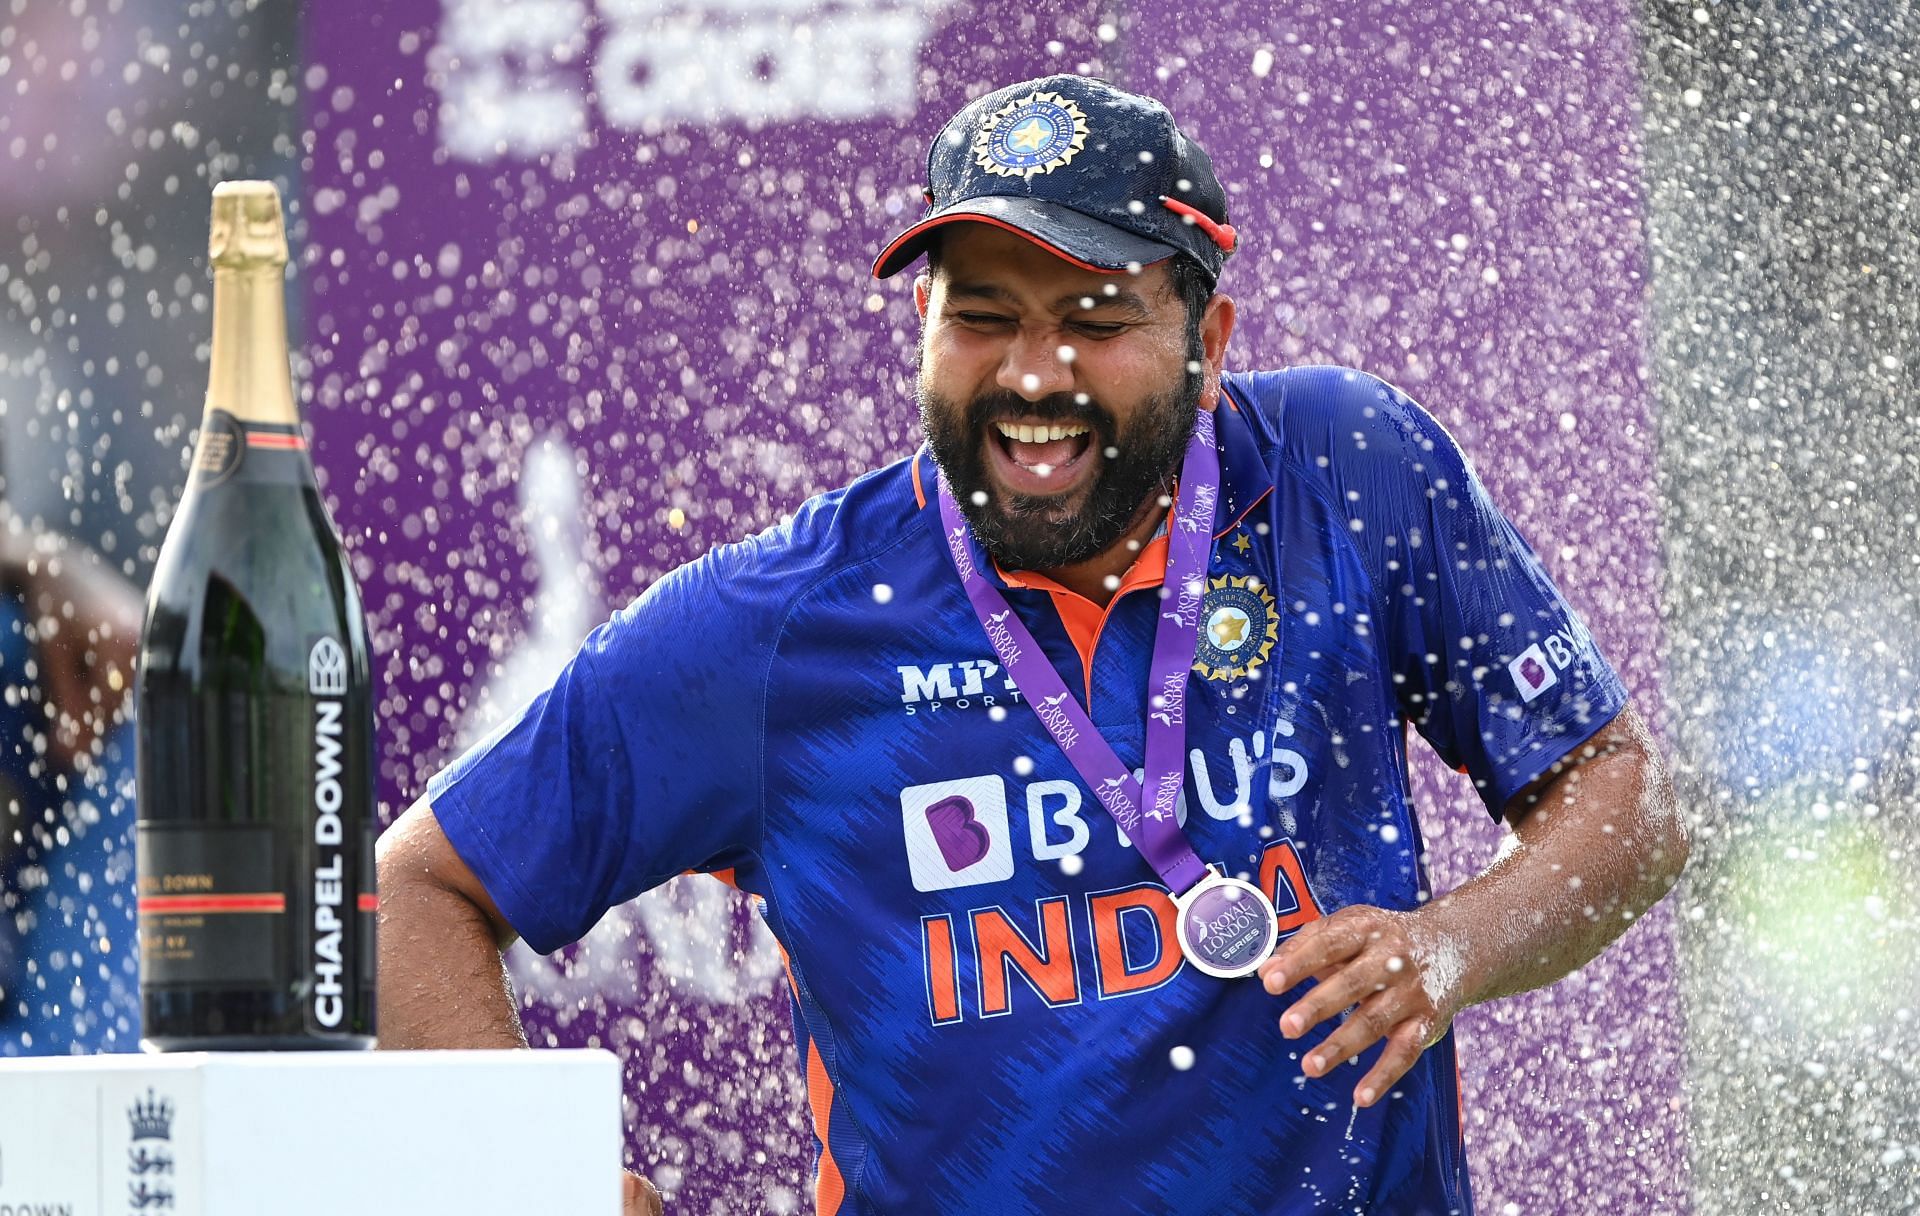 Rohit Sharma is expected to lead India in the 2023 ODI World Cup.